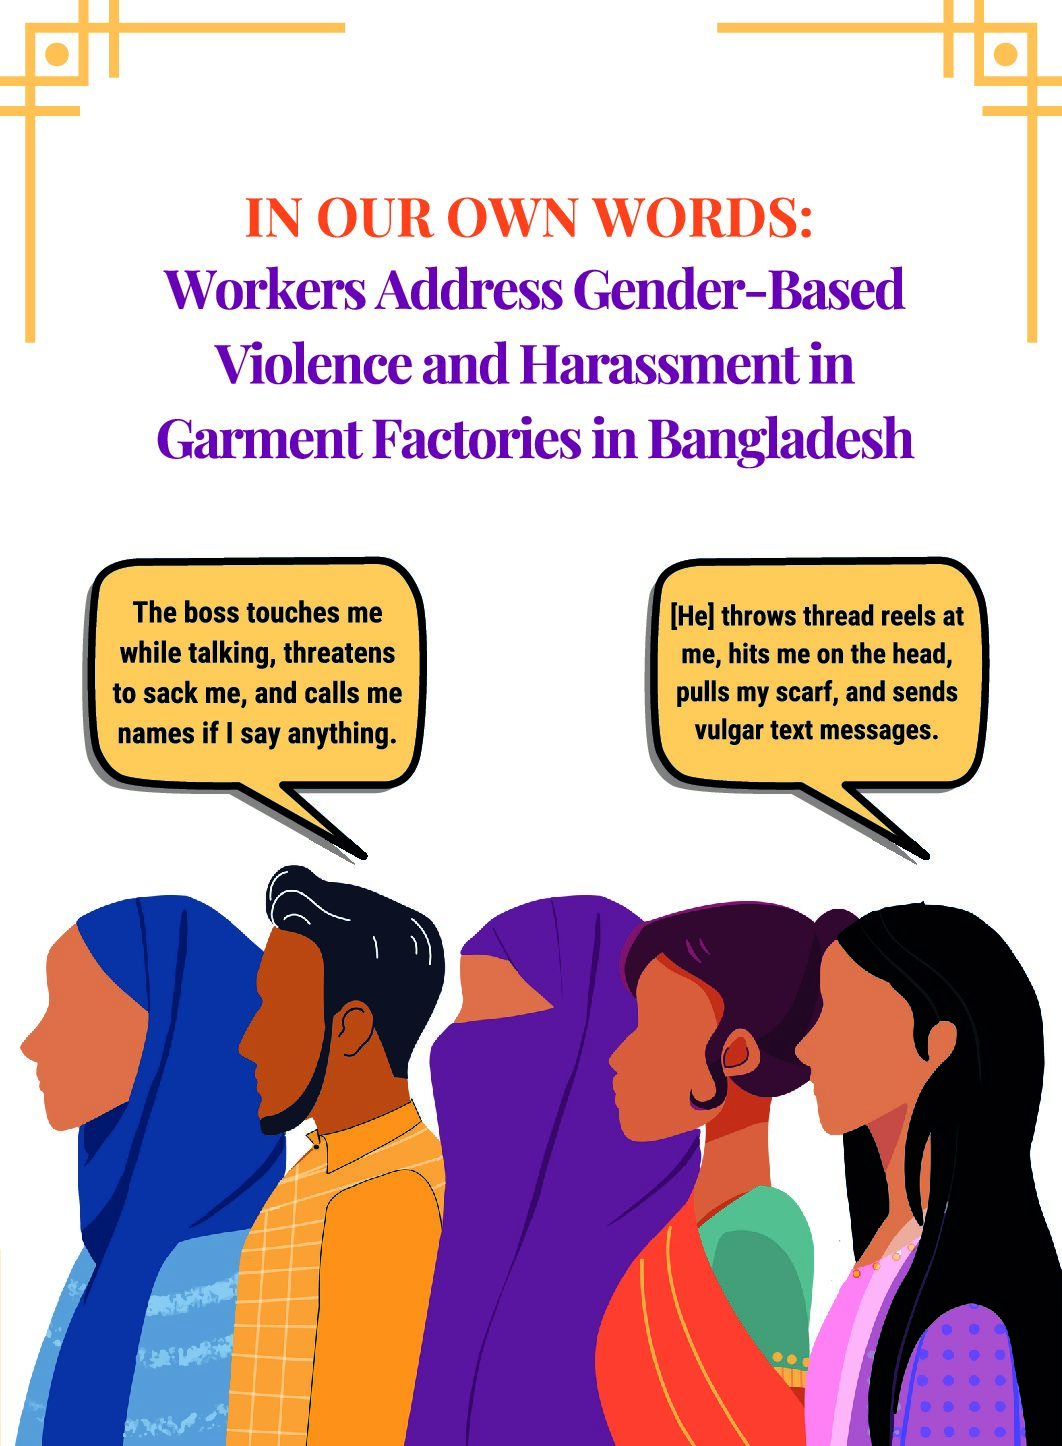 In Our Own Words: Workers Address Gender-Based Violence and Harassment in Garment Factories in Bangladesh